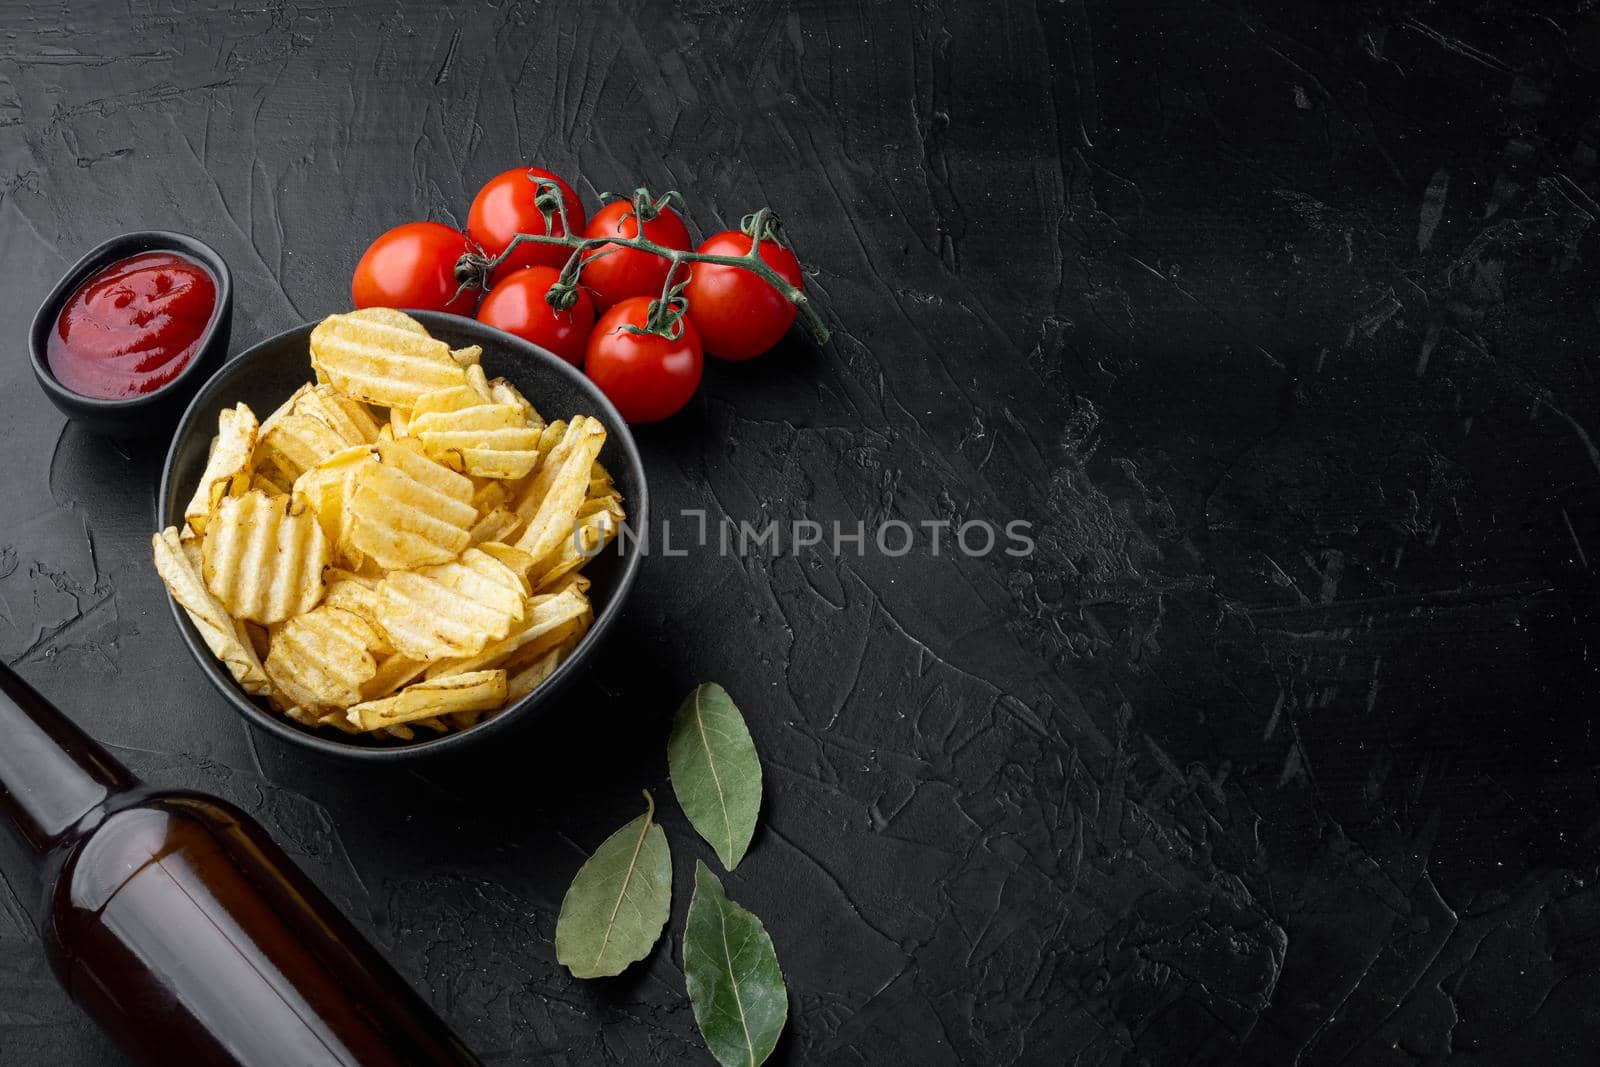 Crispy potato chips set, with bottle of beer, on black stone background, with copy space for text